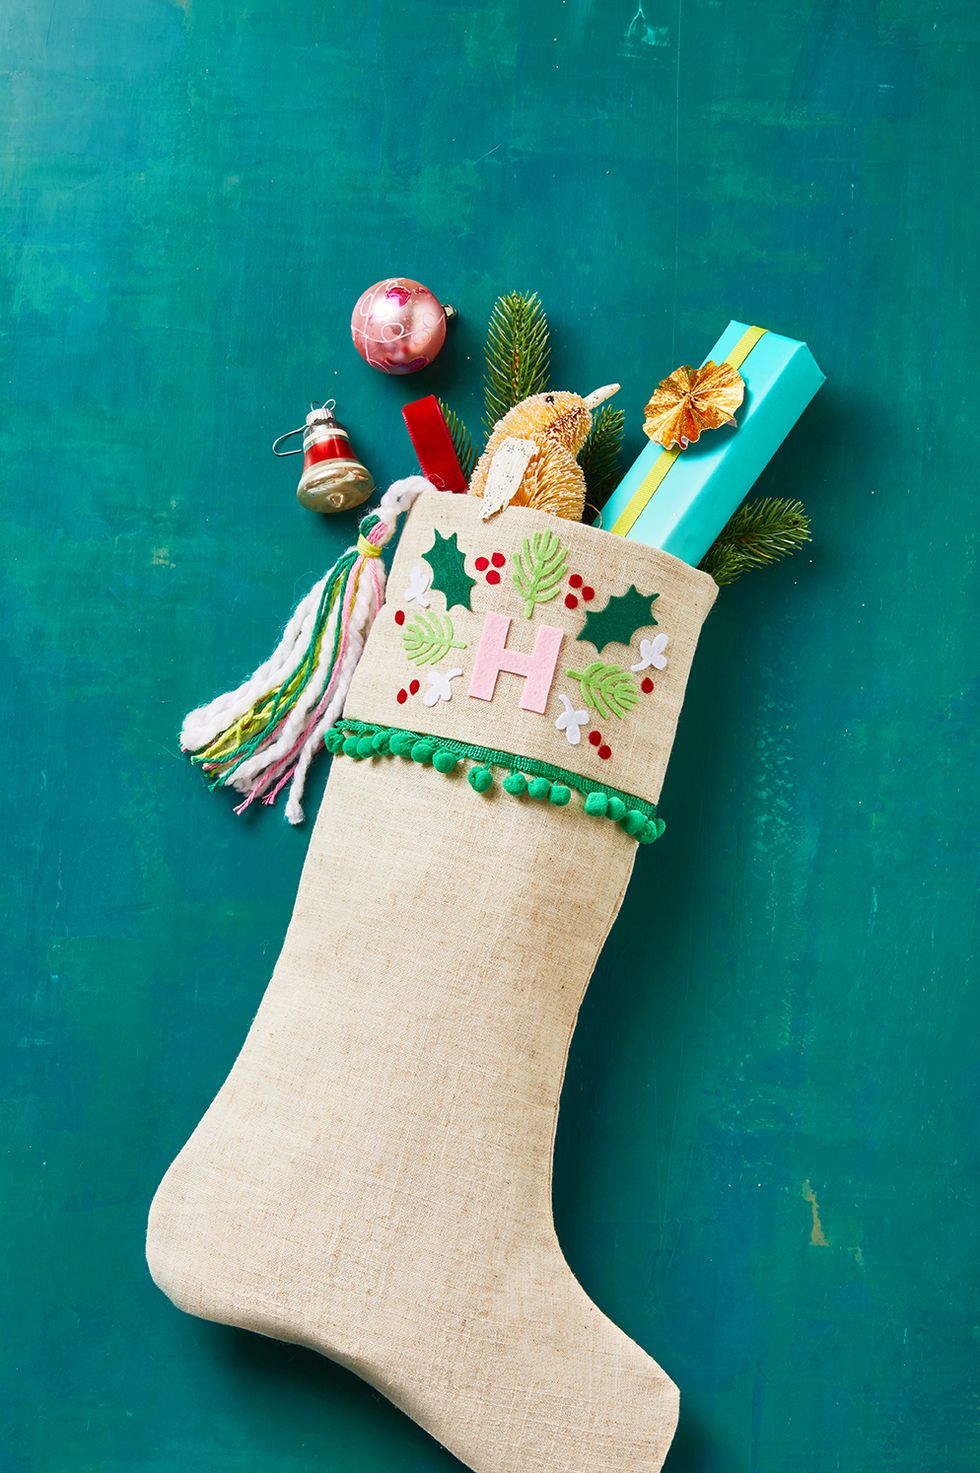 100+ Christmas Crafts for Kids - Tons of Art and Crafting Ideas